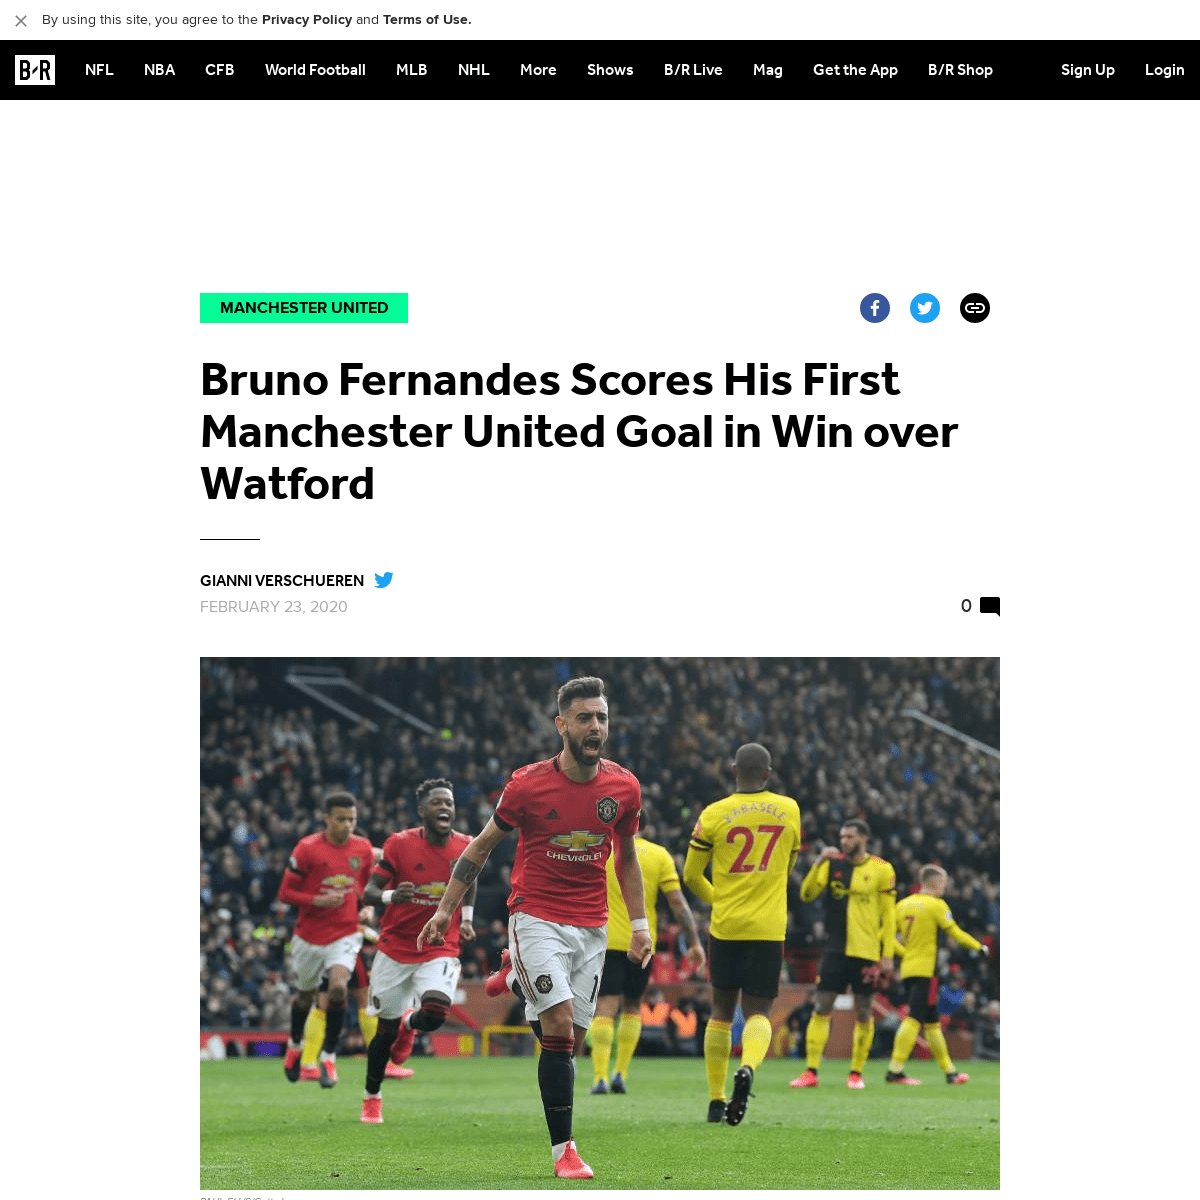 A complete backup of bleacherreport.com/articles/2877595-bruno-fernandes-scores-his-first-manchester-united-goal-in-win-over-wat